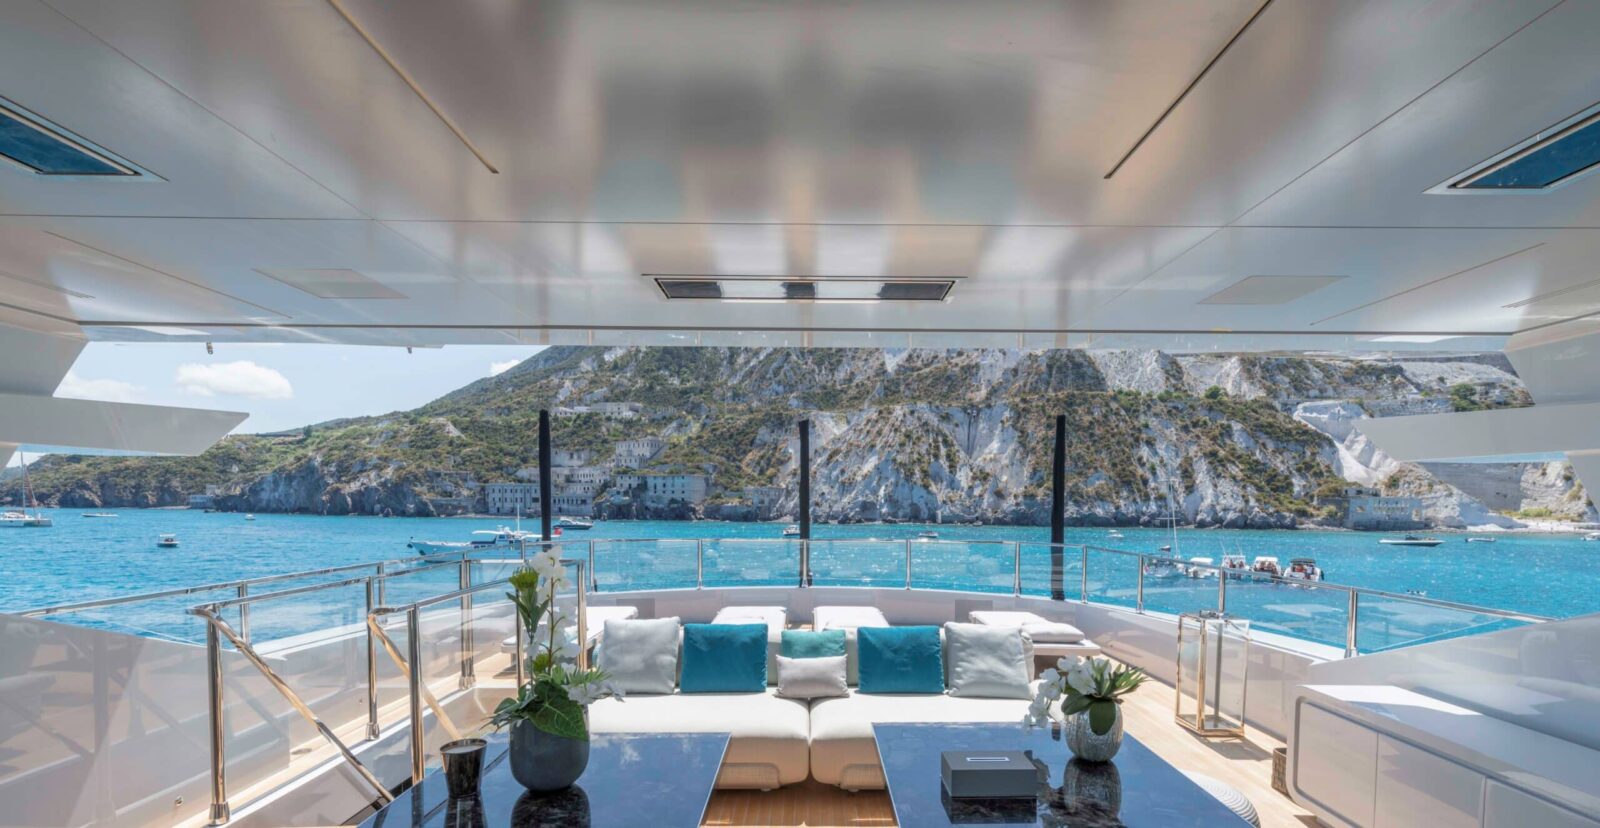 Electric Heating on Superyacht Deck